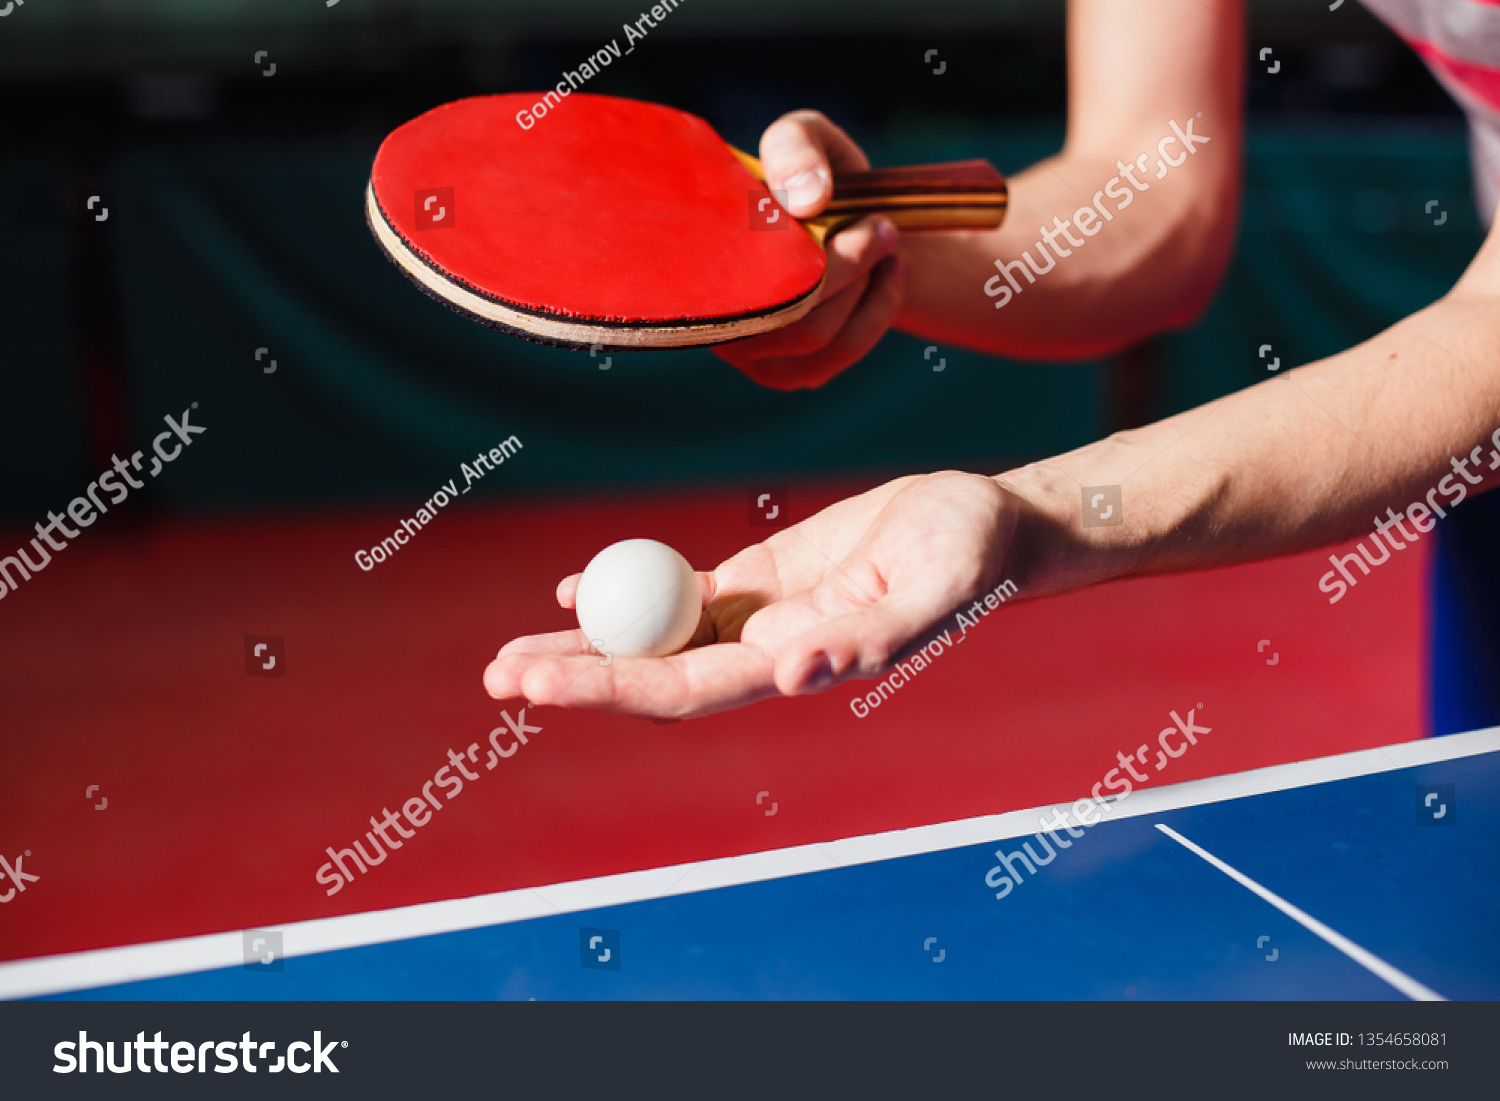 A young man is playing ping pong. He holds a ball and a racket in his hands #1354658081